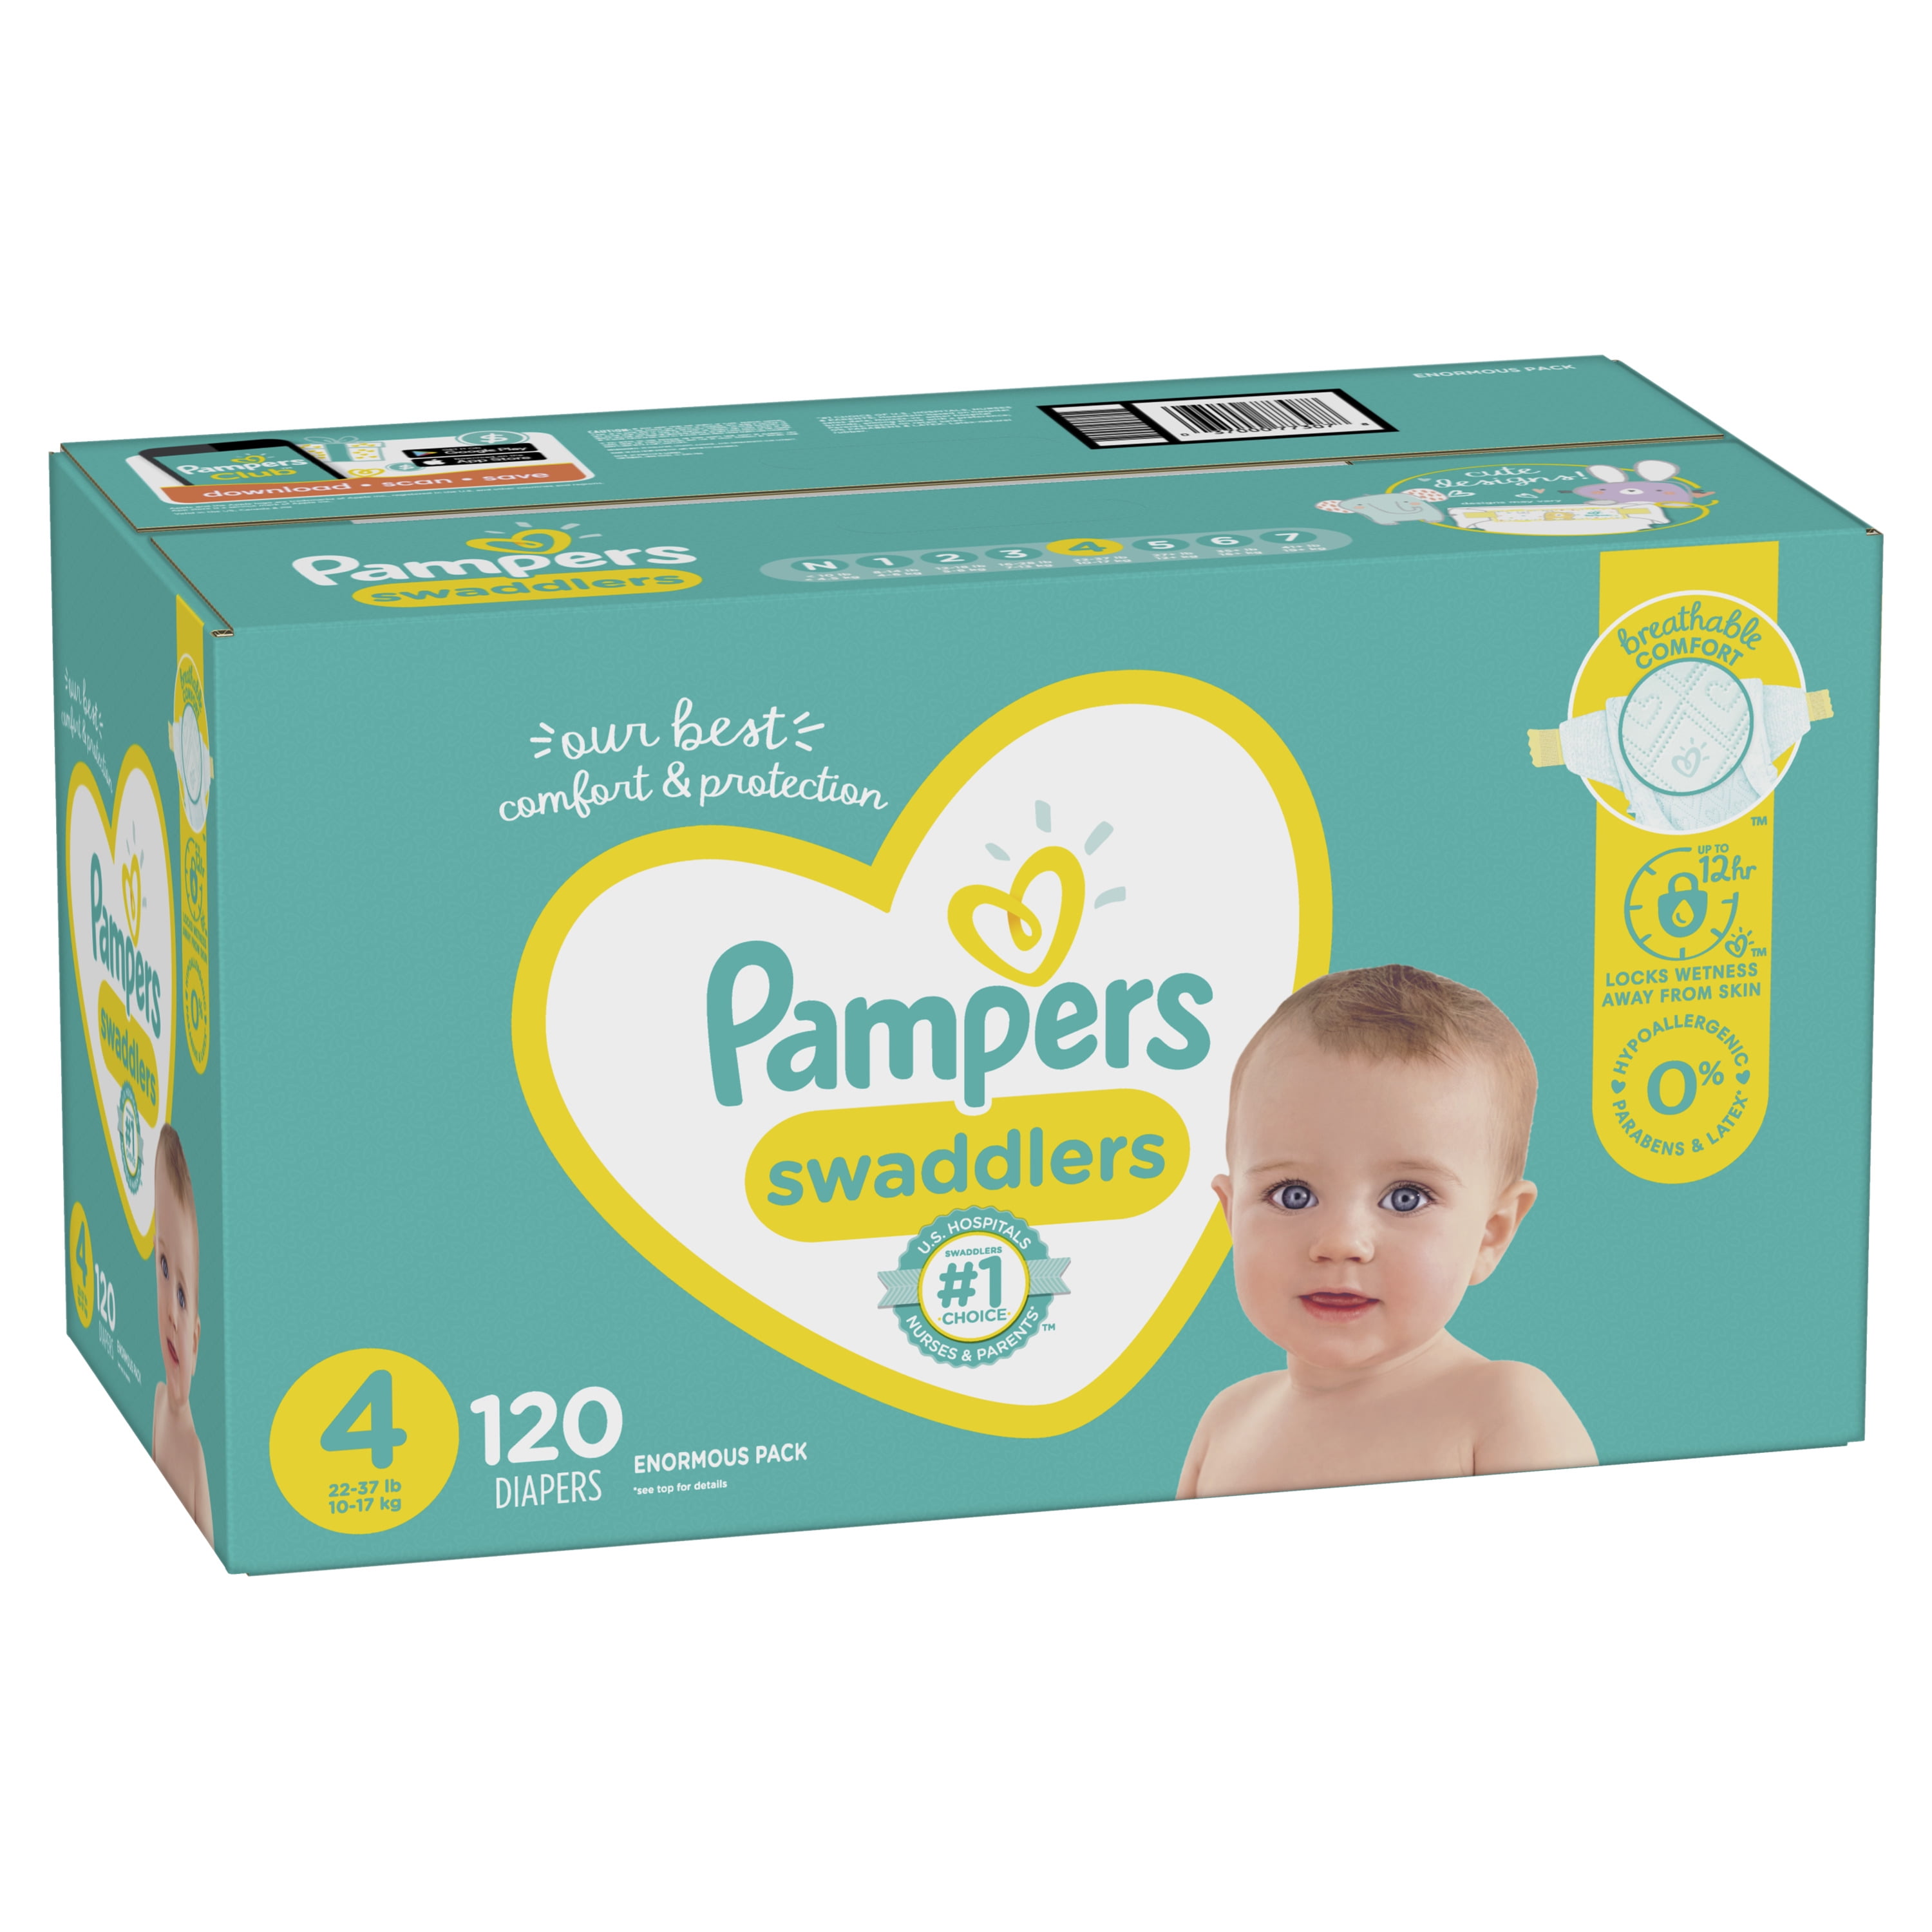 120 pampers